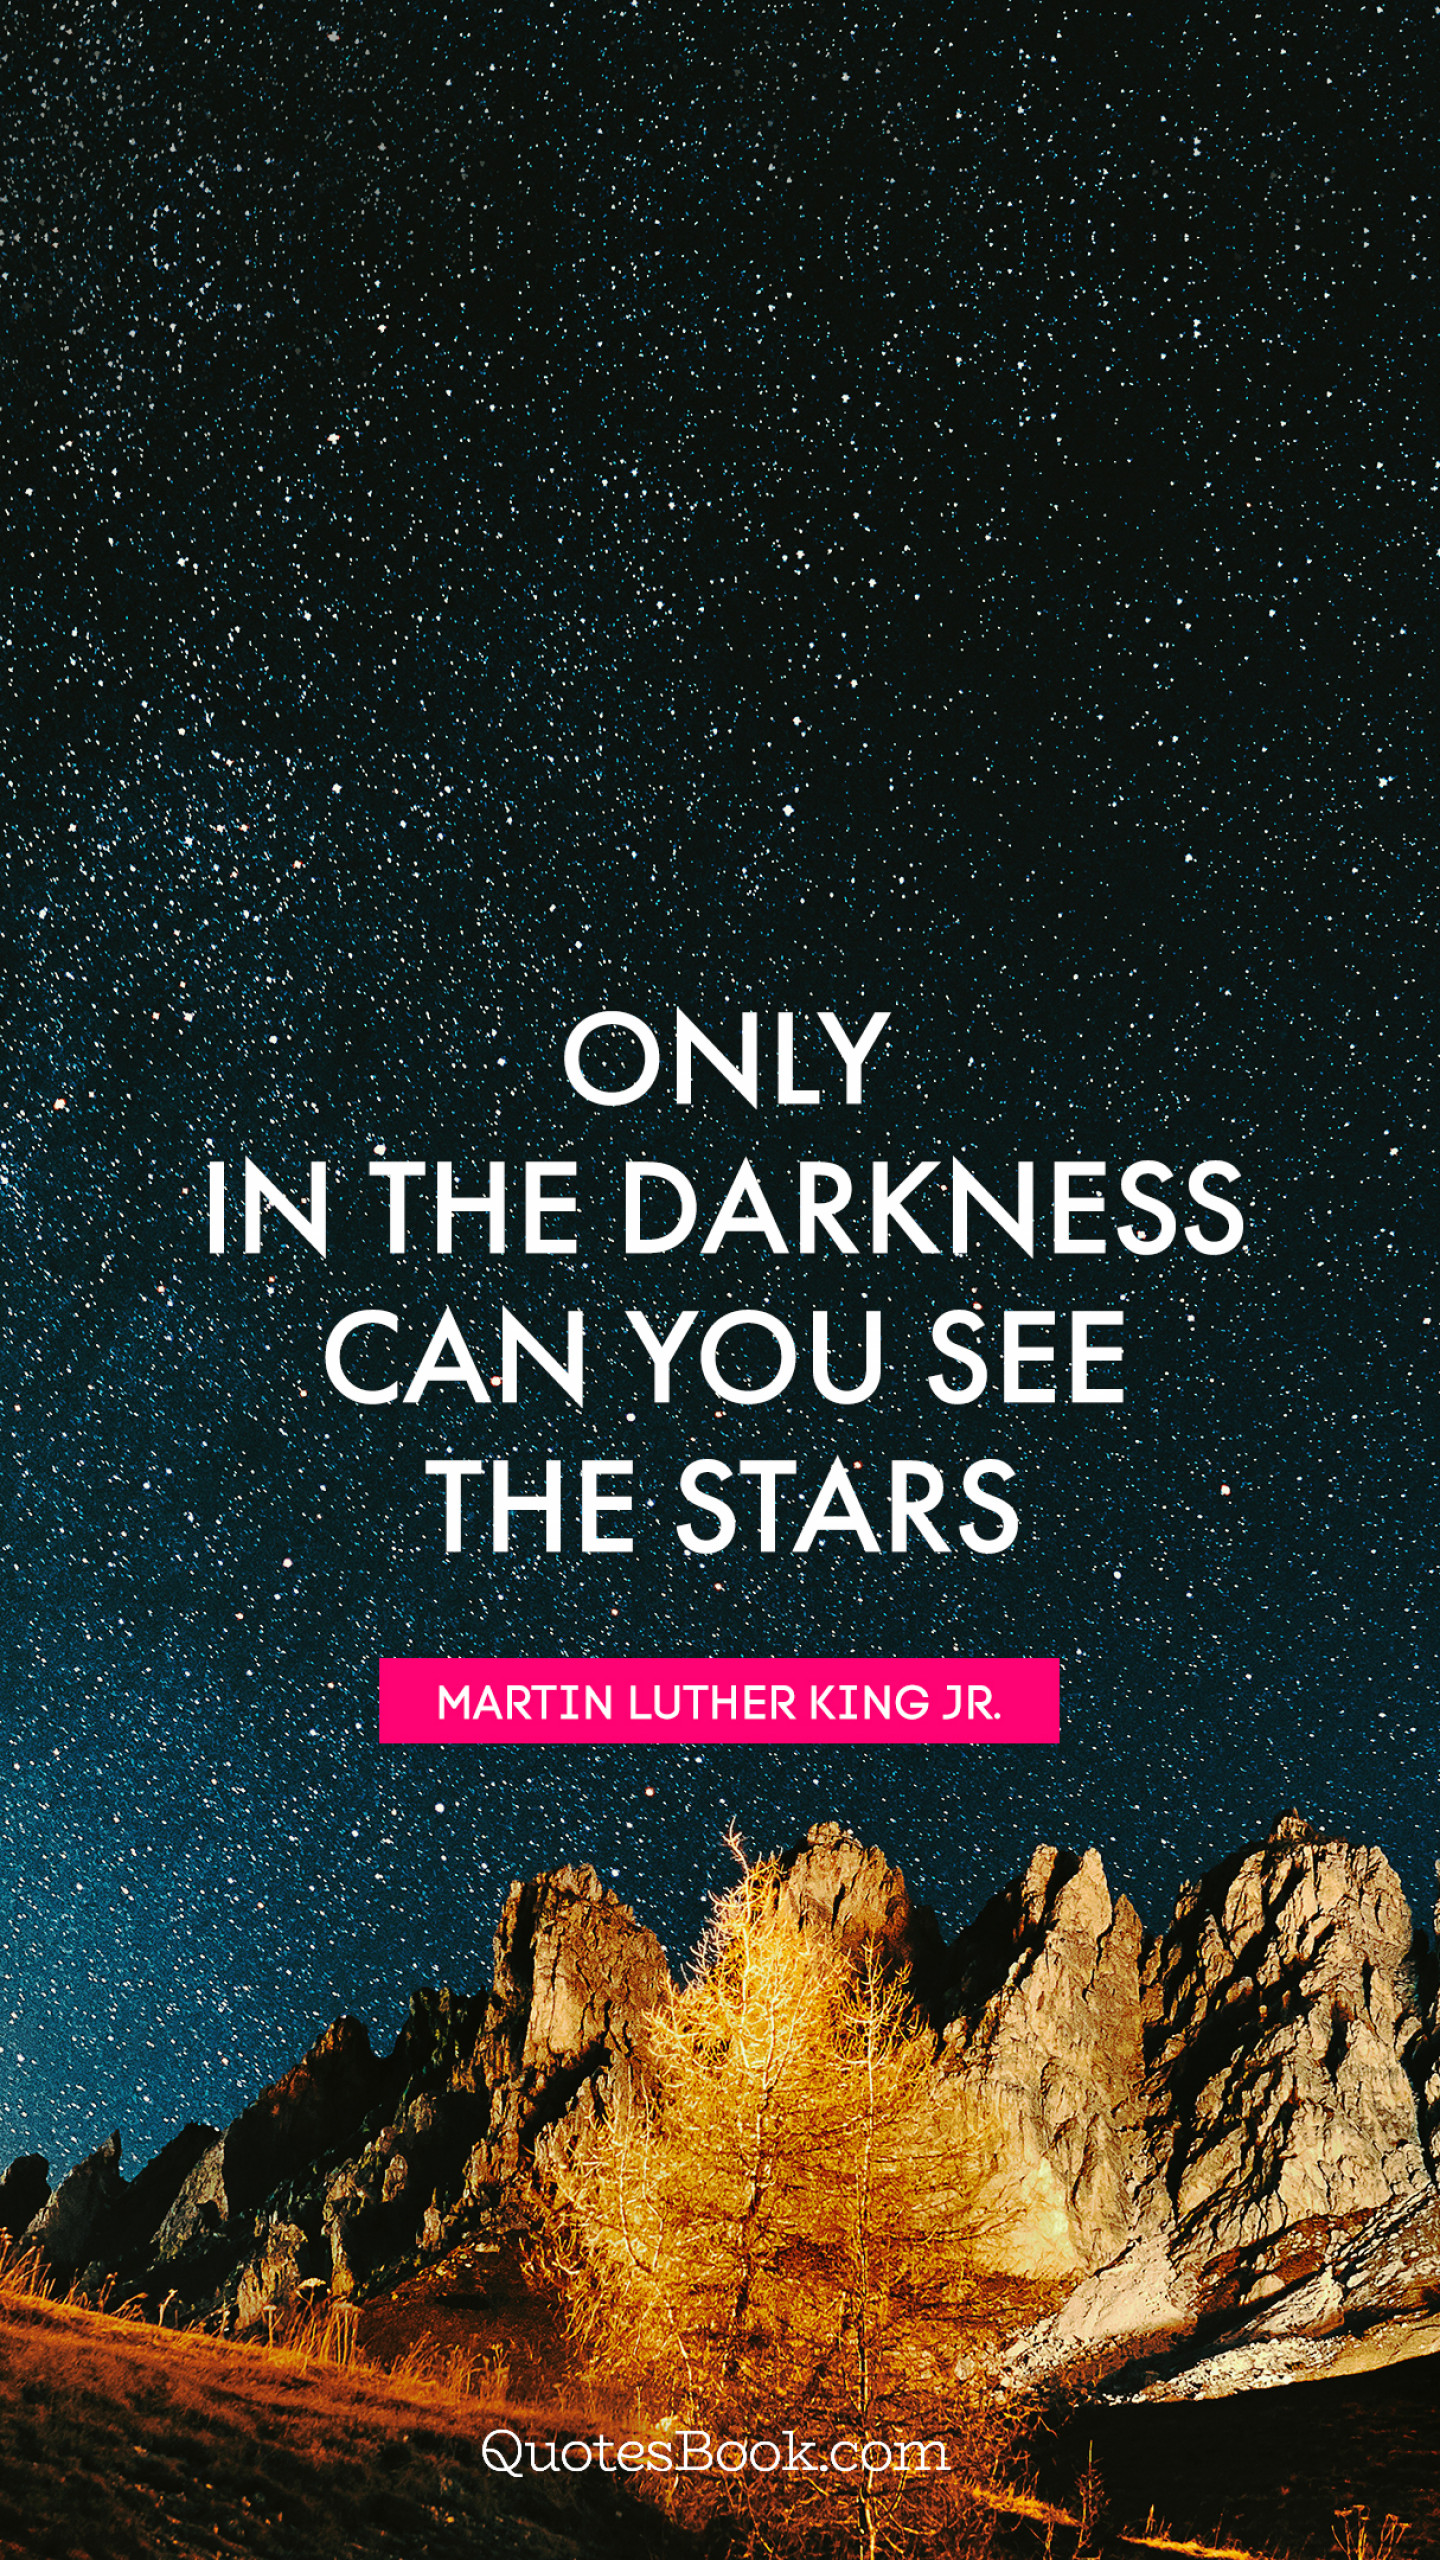 Only in the darkness can you see the stars. - Quote by Martin Luther ...